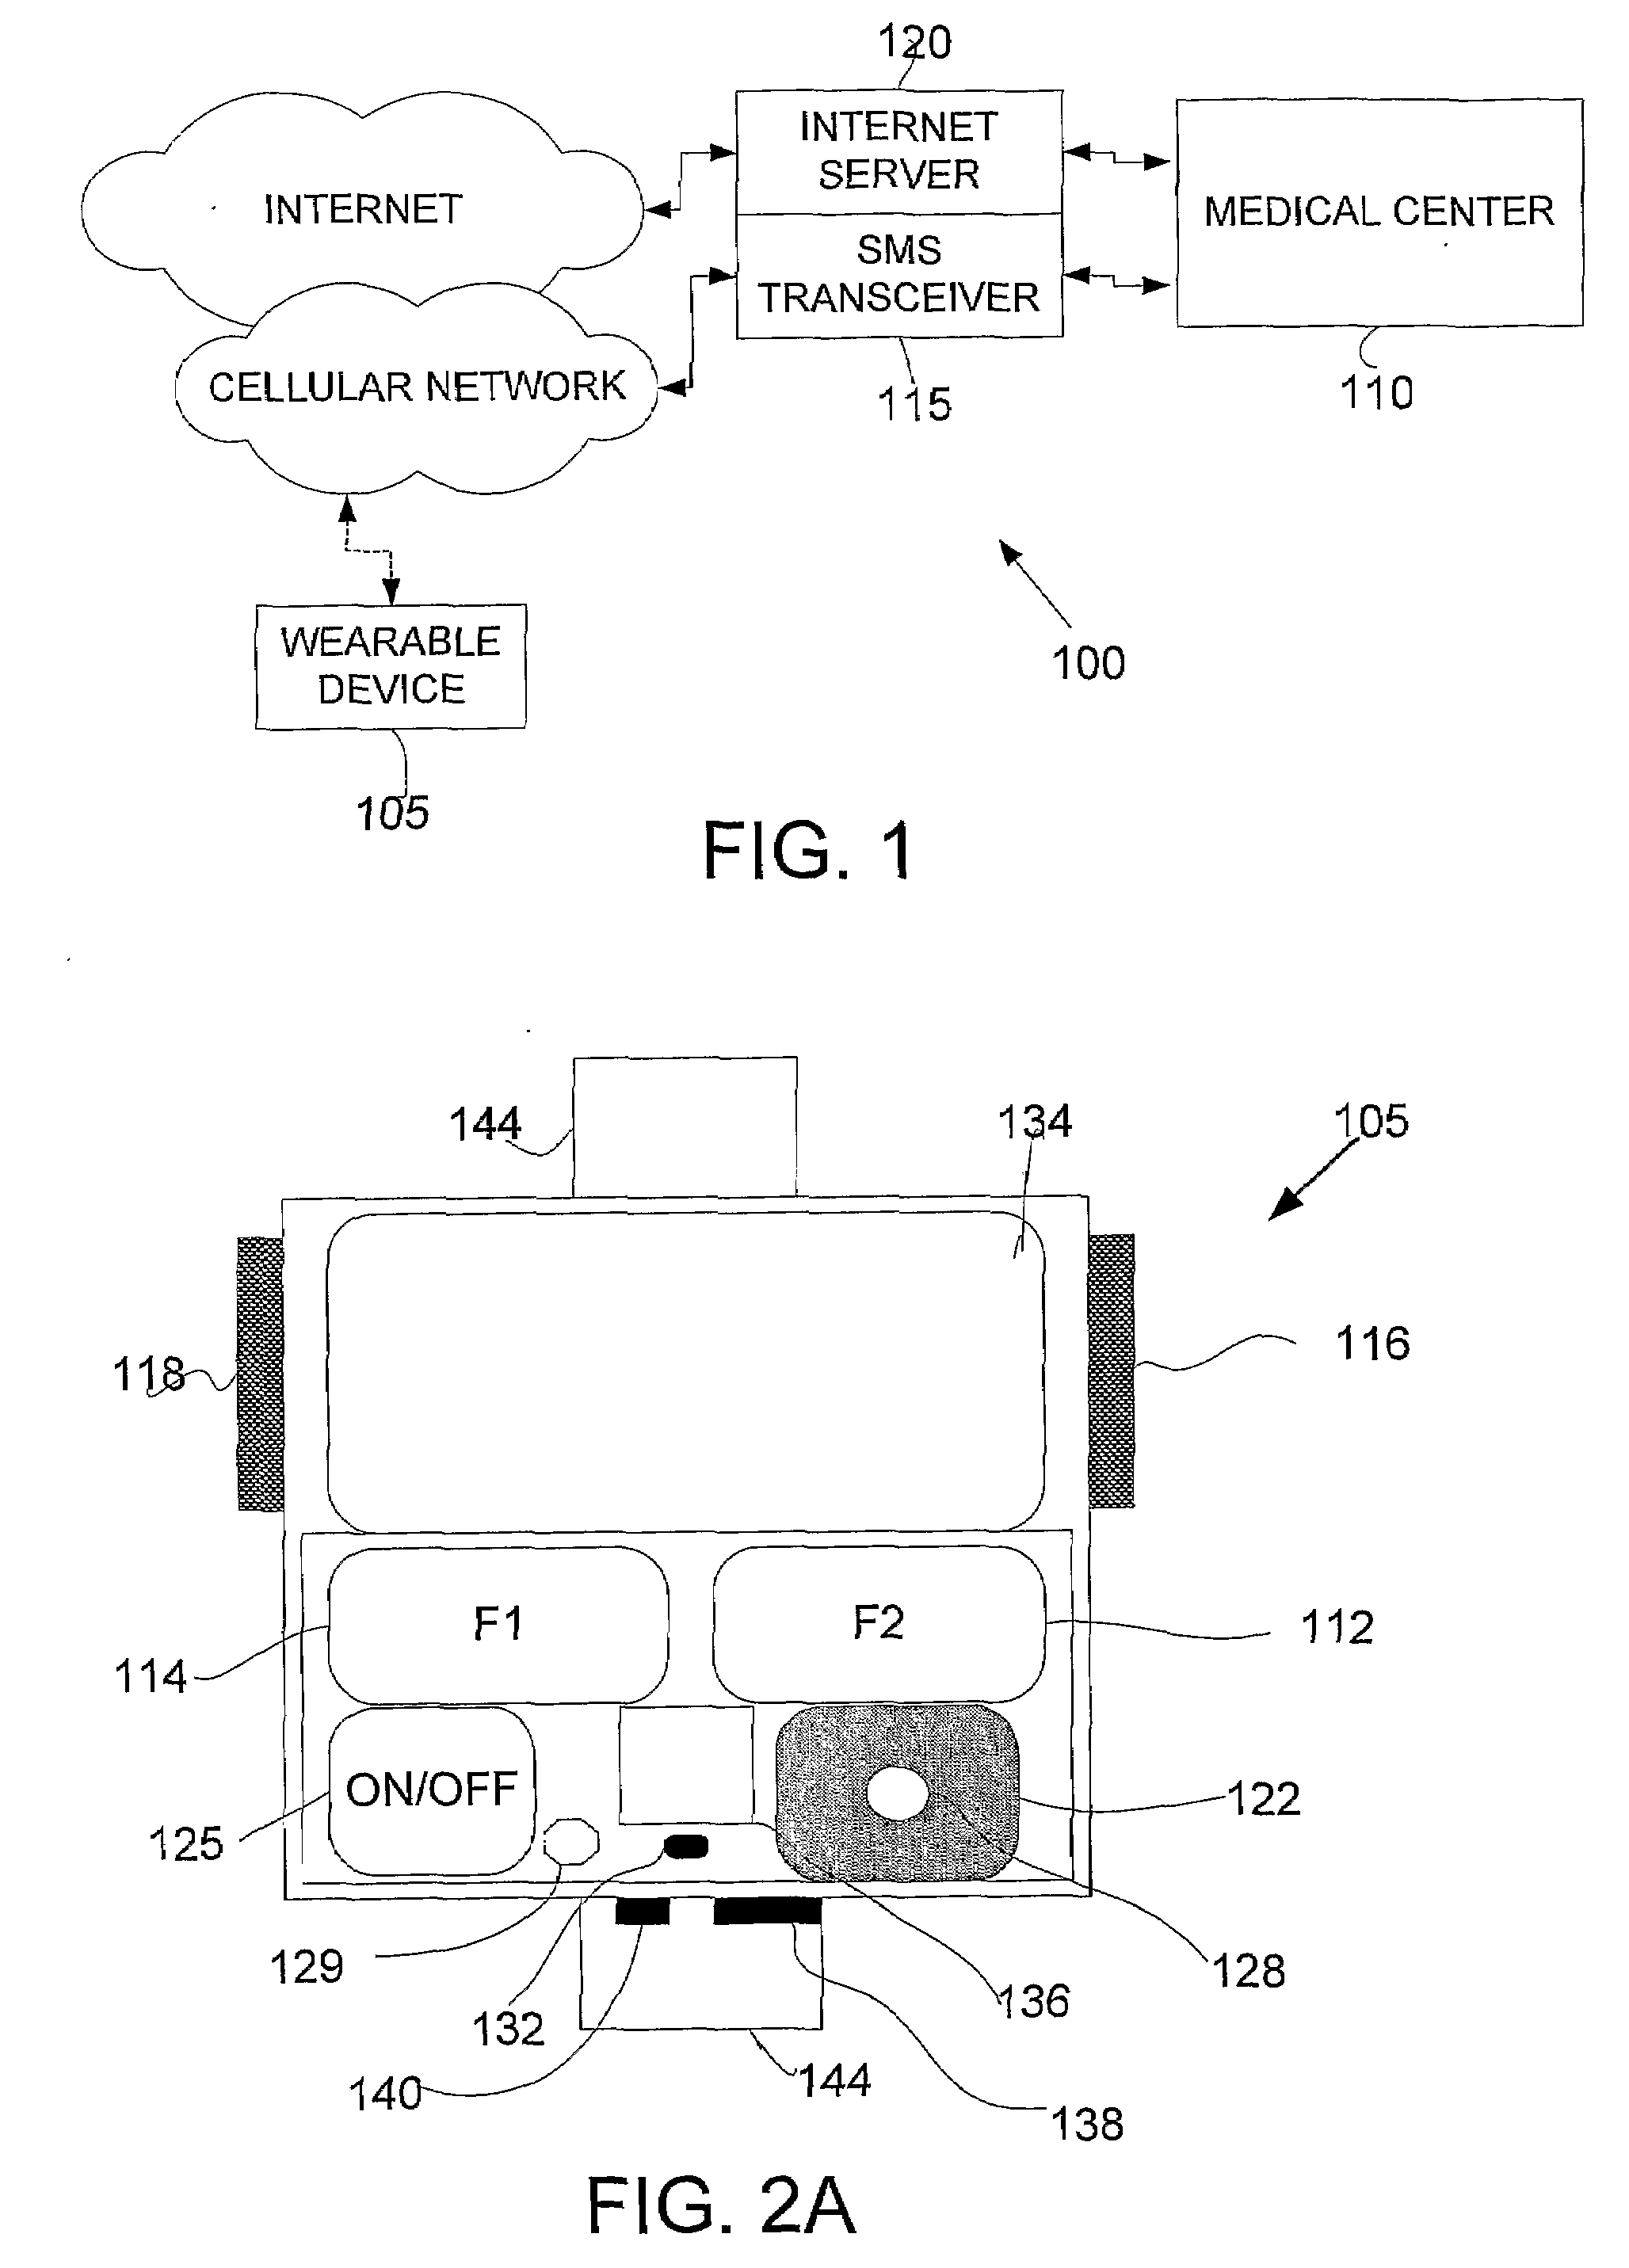 Wearable Device, System and Method for Measuring Vital Parameters